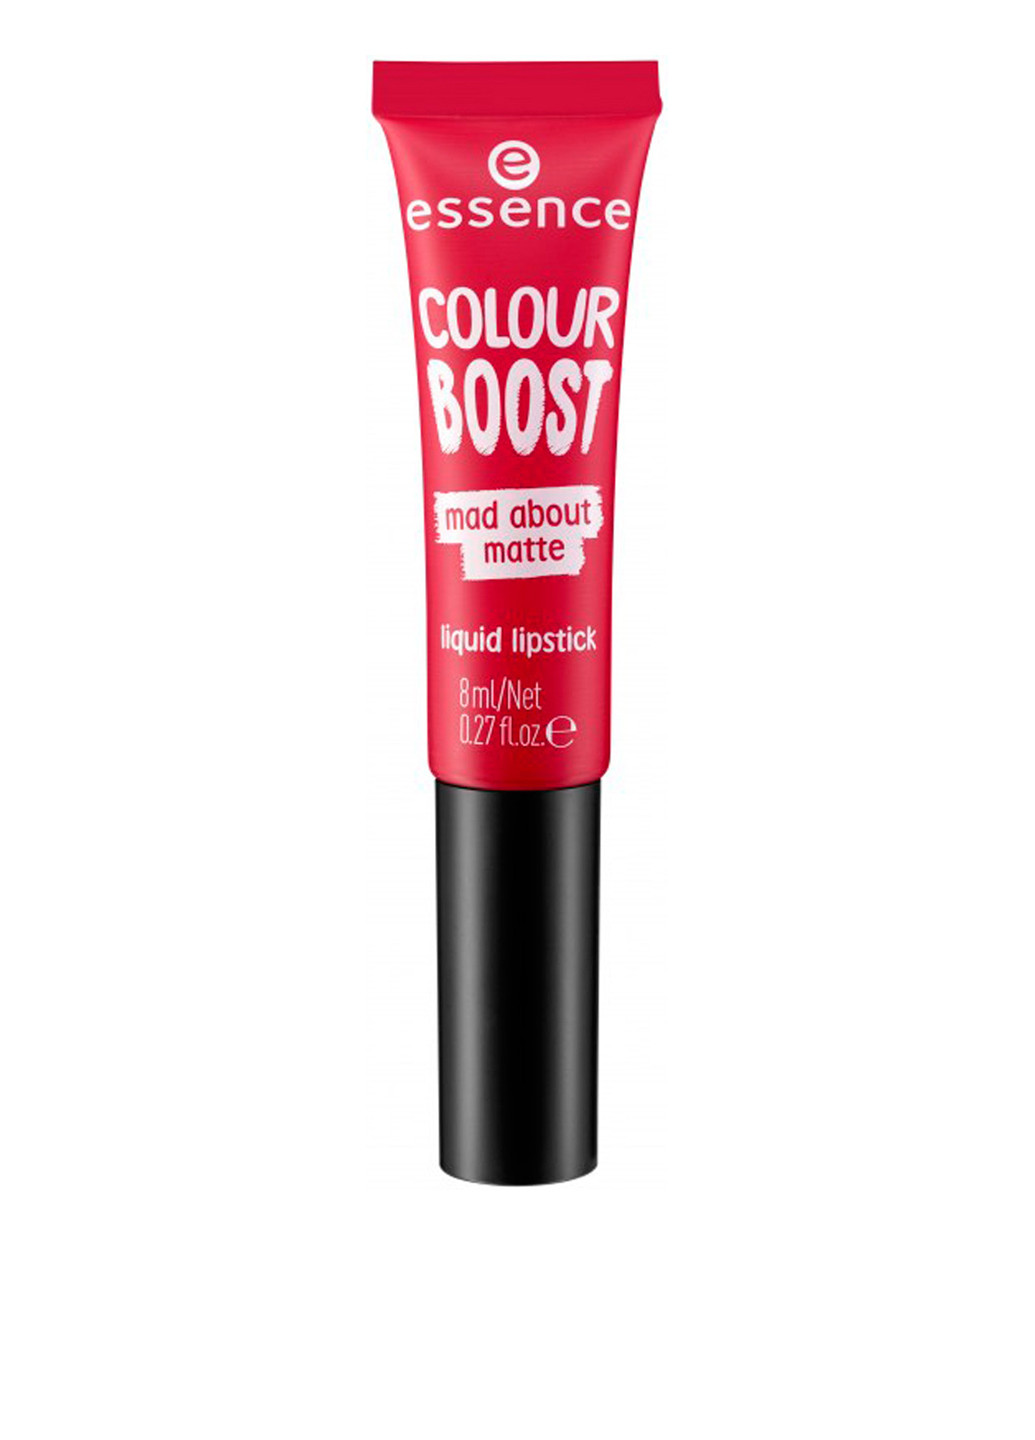 Помада рідка матова Colour Boost Mad About Matte №07 (Seeing Red), 8 мл Essence (117634322)